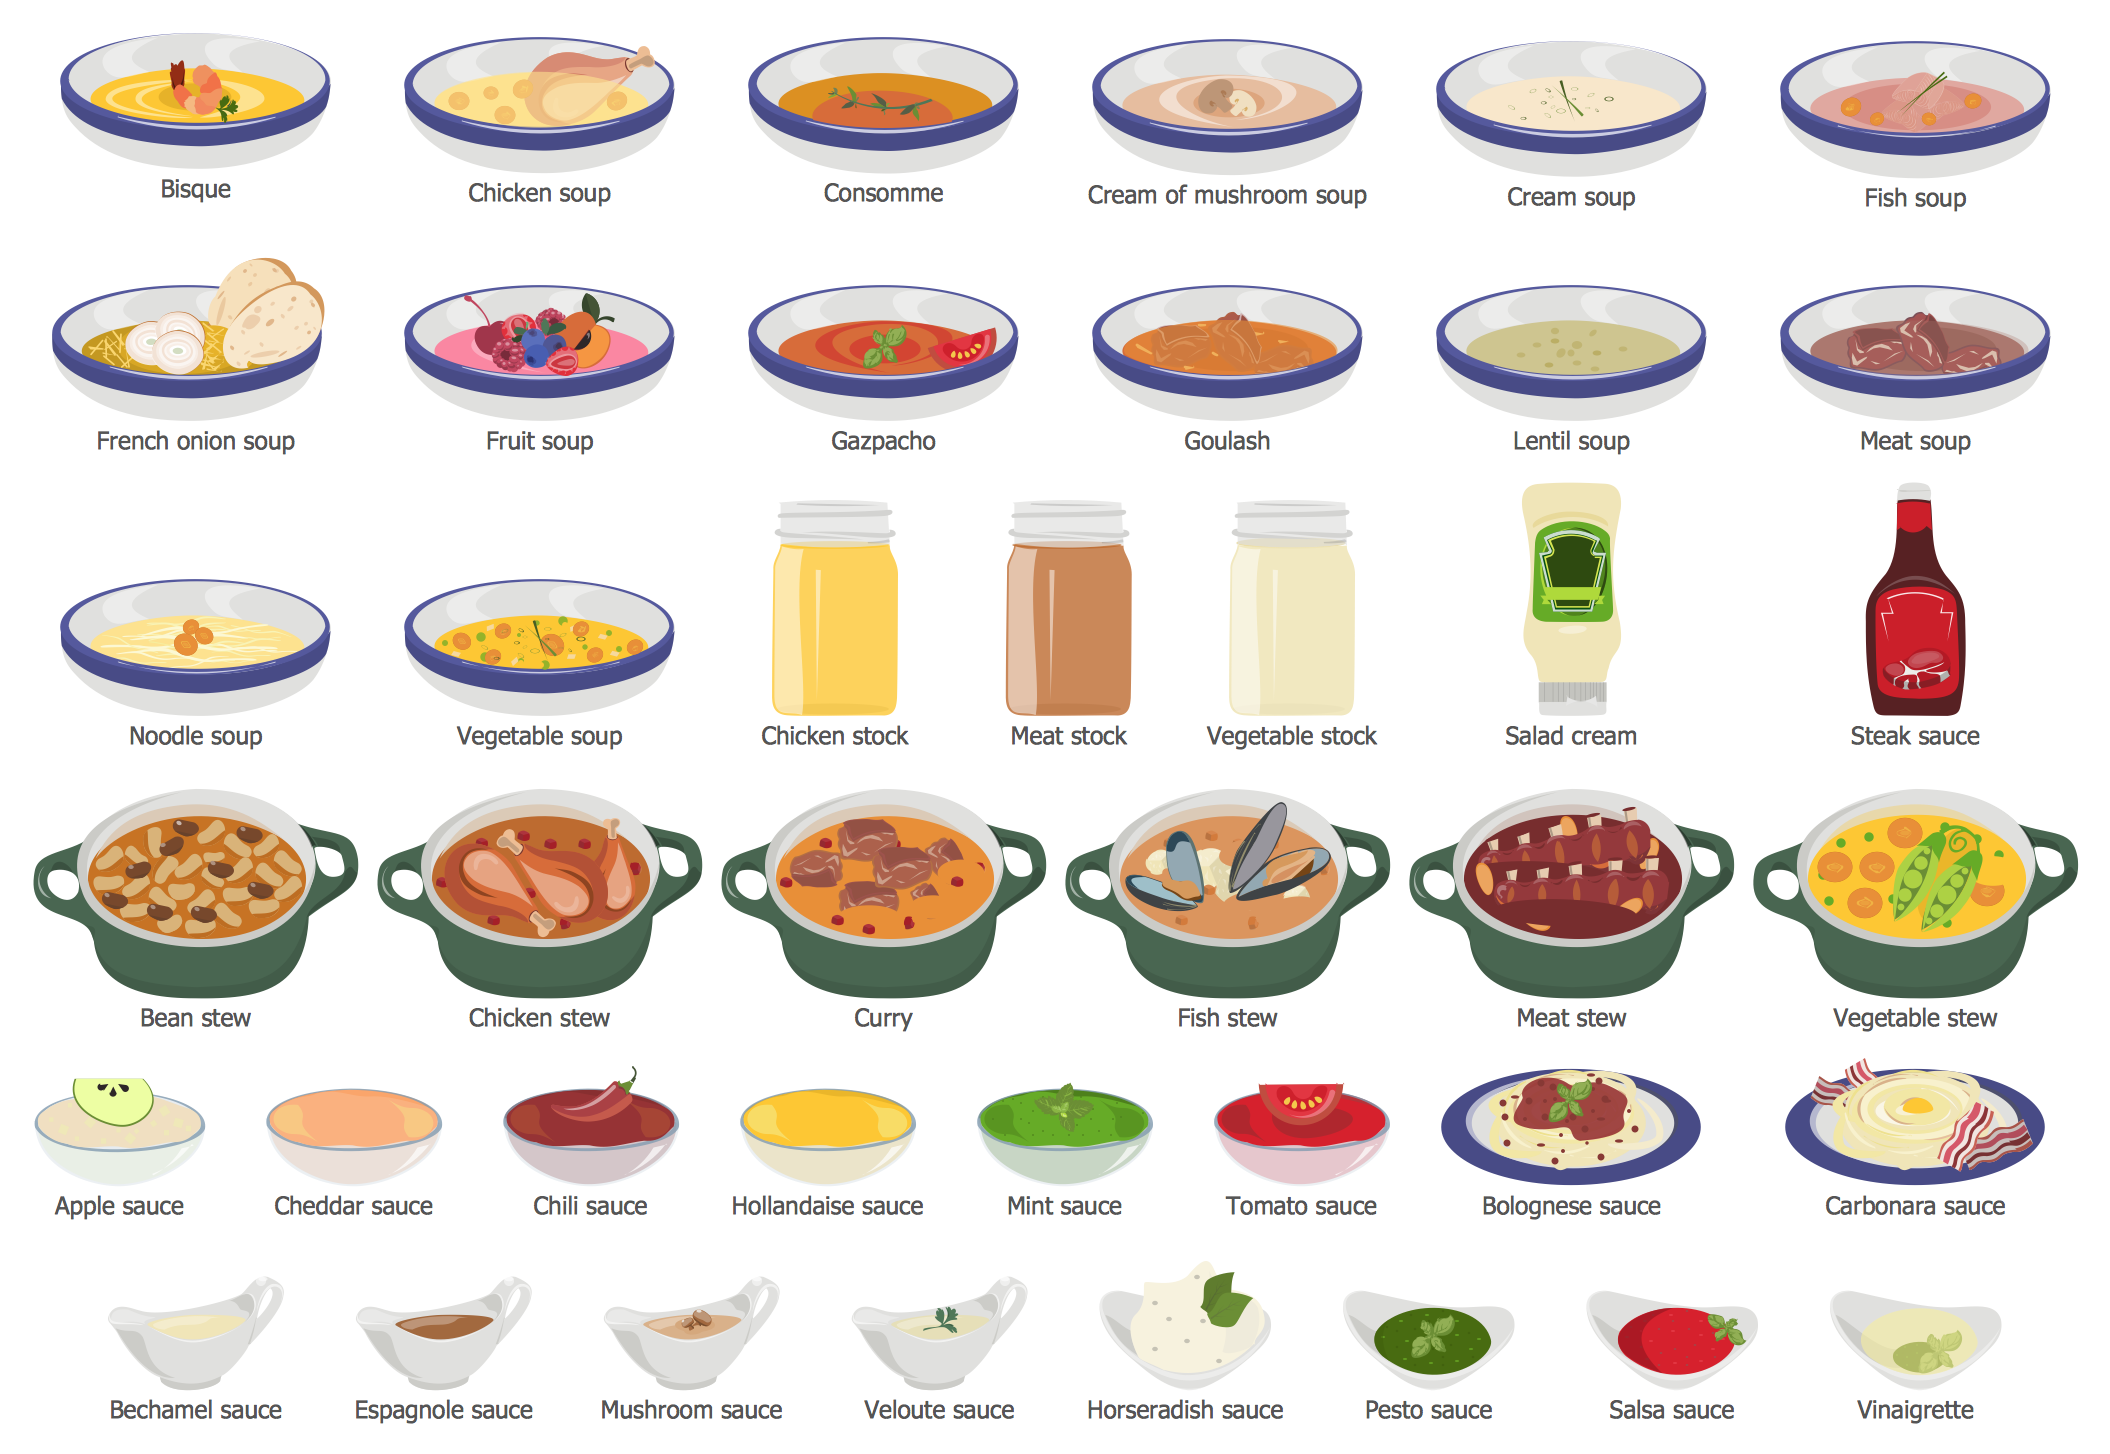 Soups, Stocks, Stews, and Sauces Library